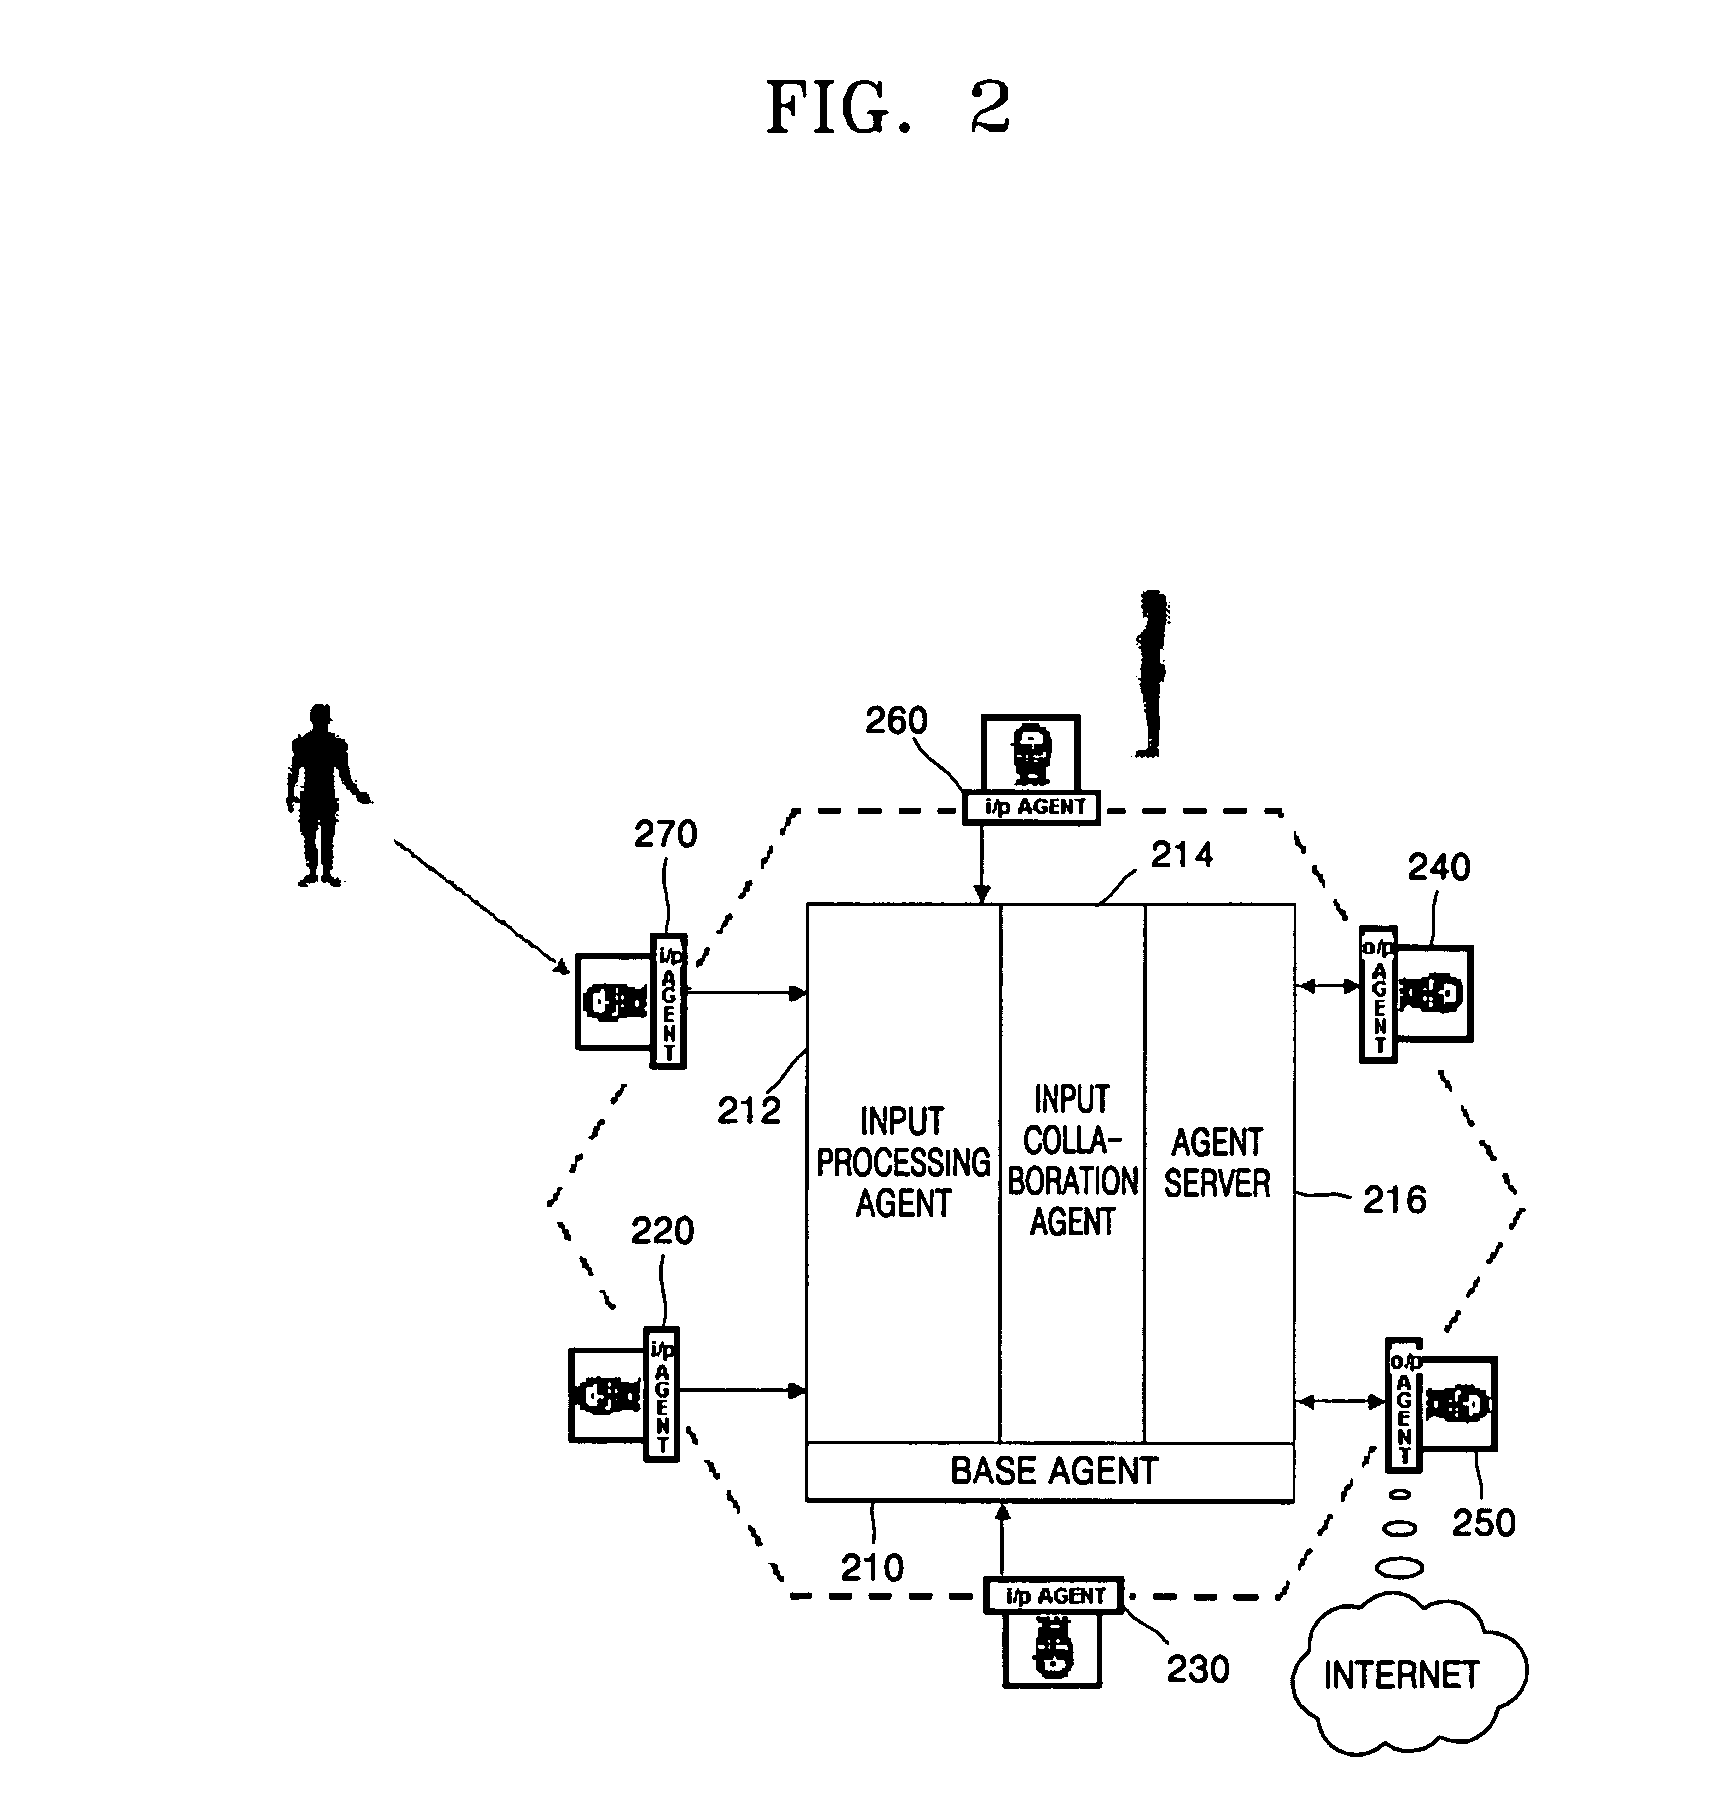 System and method for multi-modal context-sensitive applications in home network environment